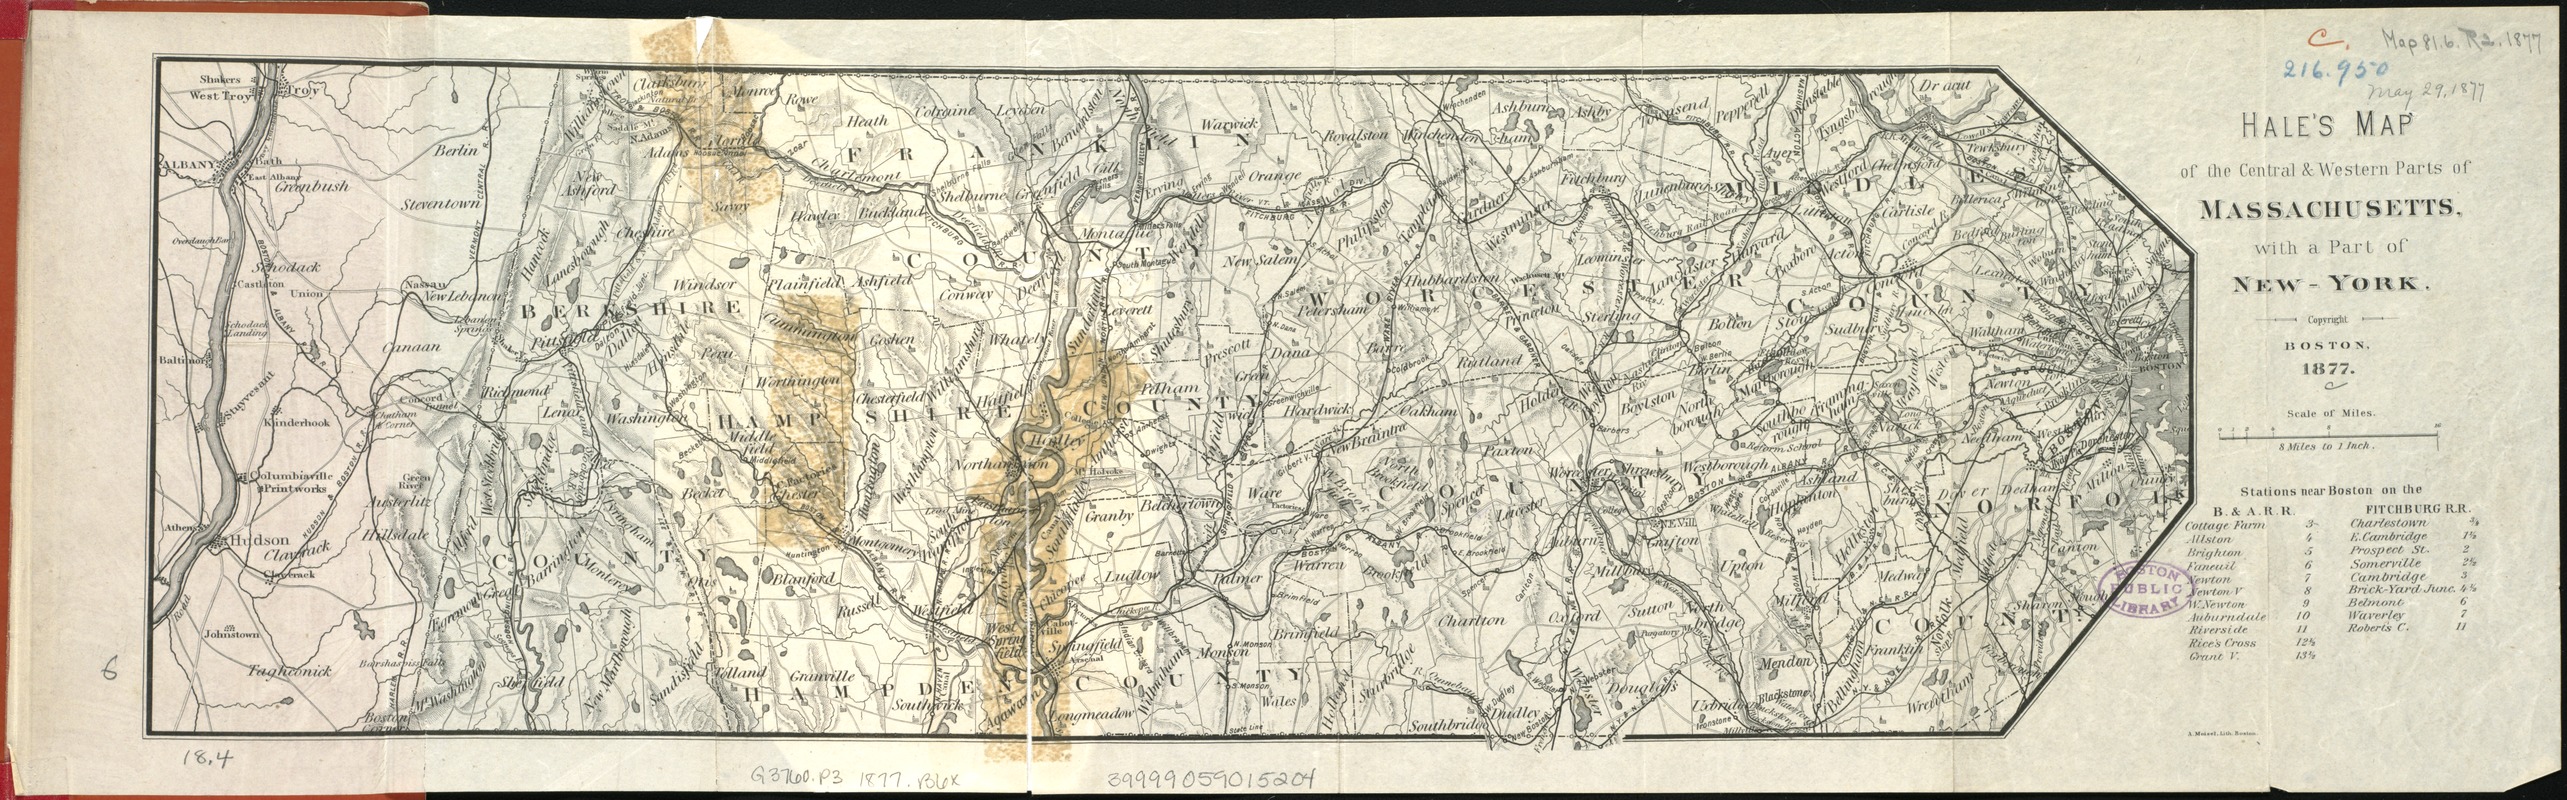 Hale's map of the central & western parts of Massachusetts, with a part of New-York